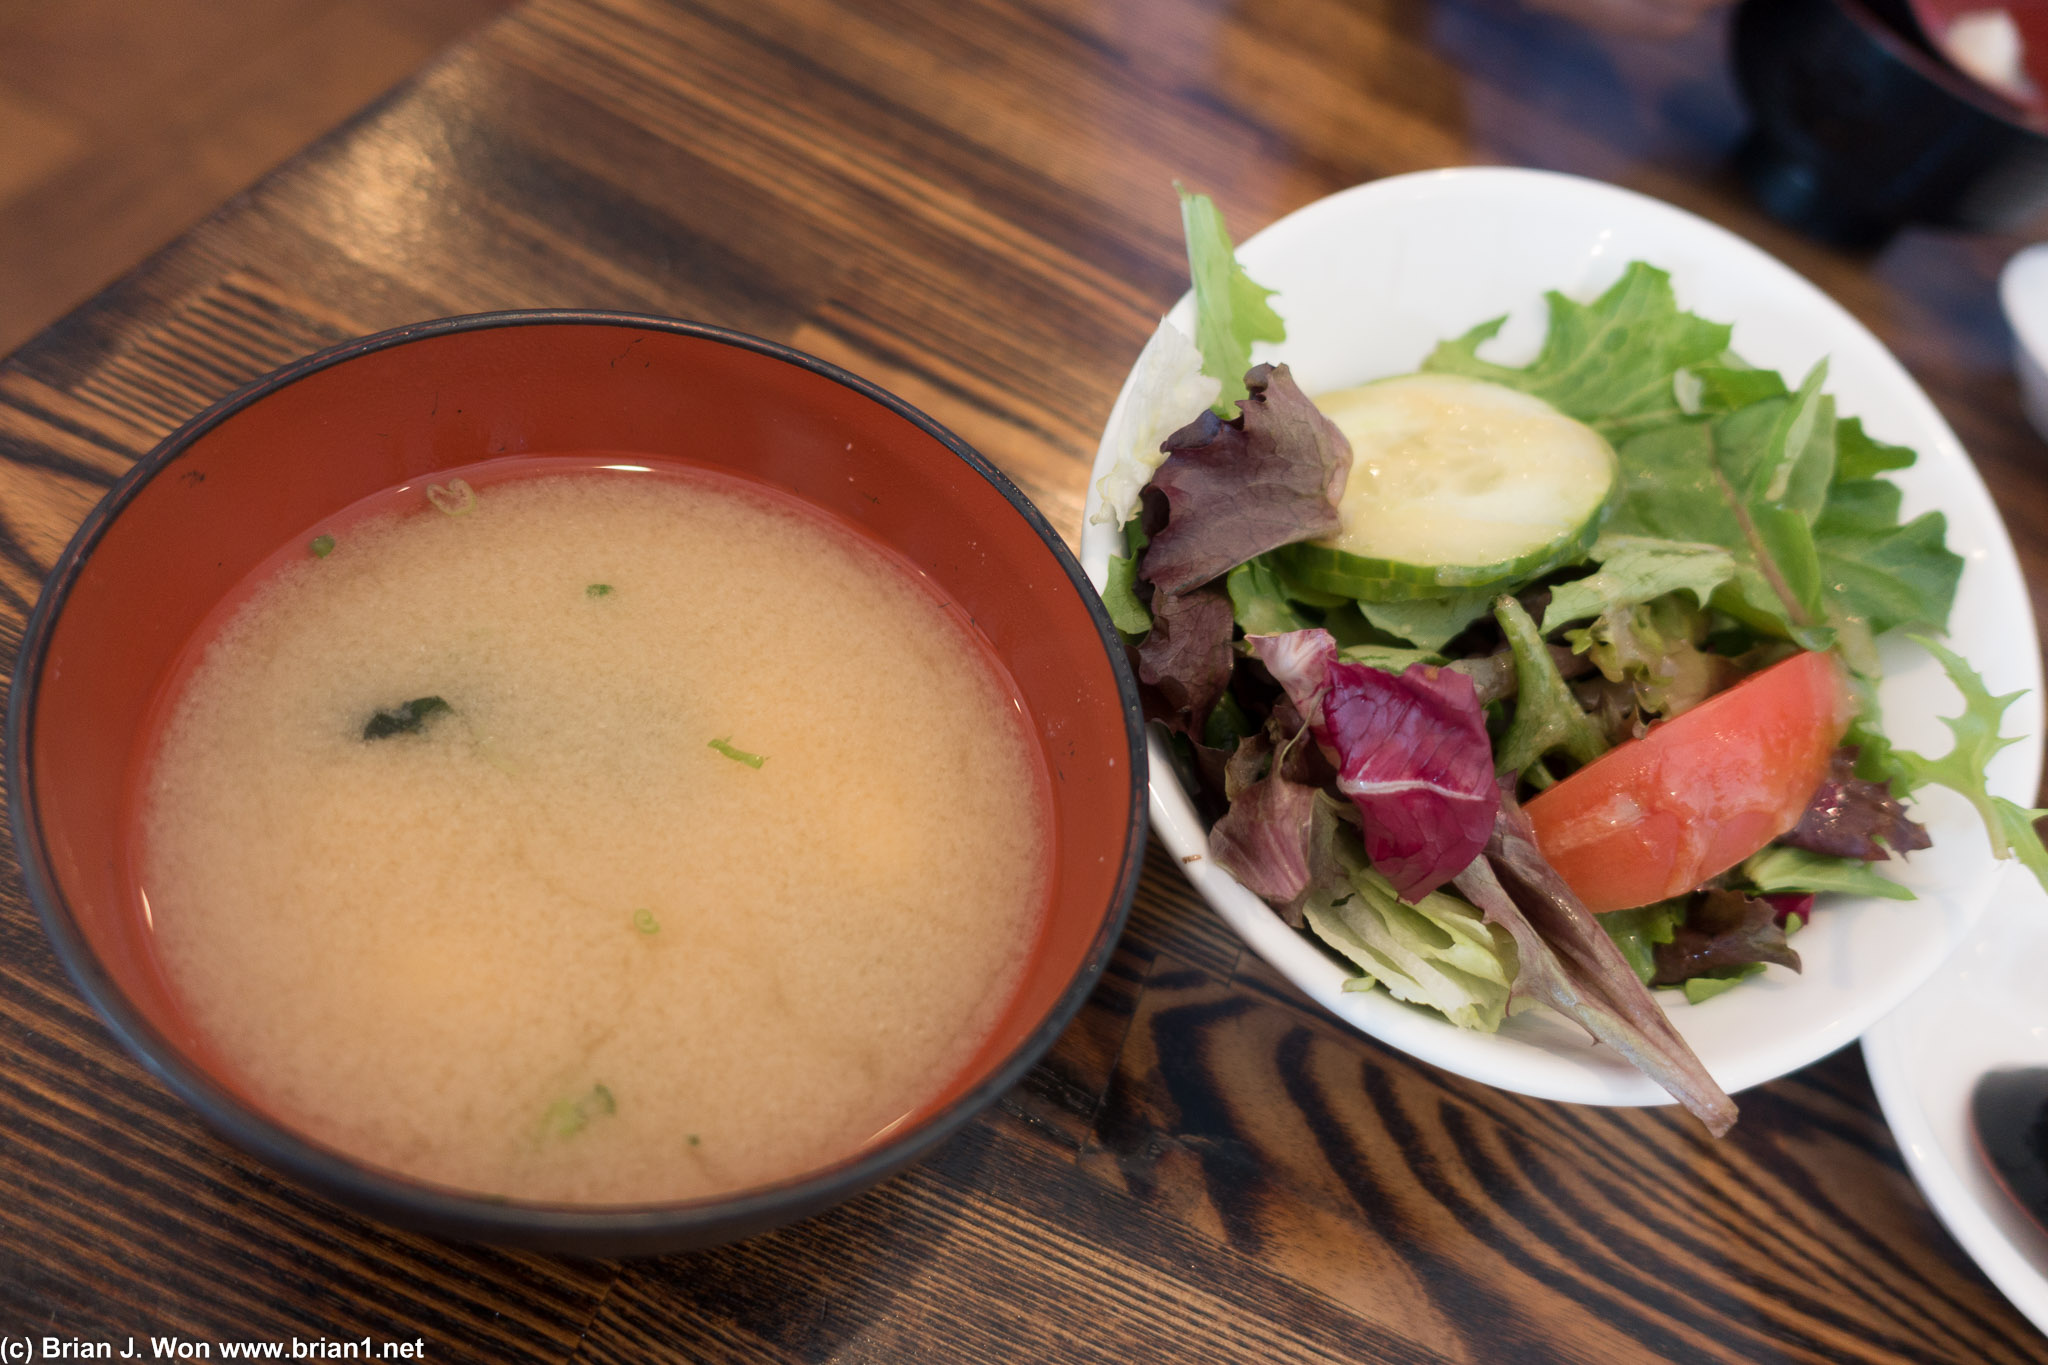 Miso soup and salad.